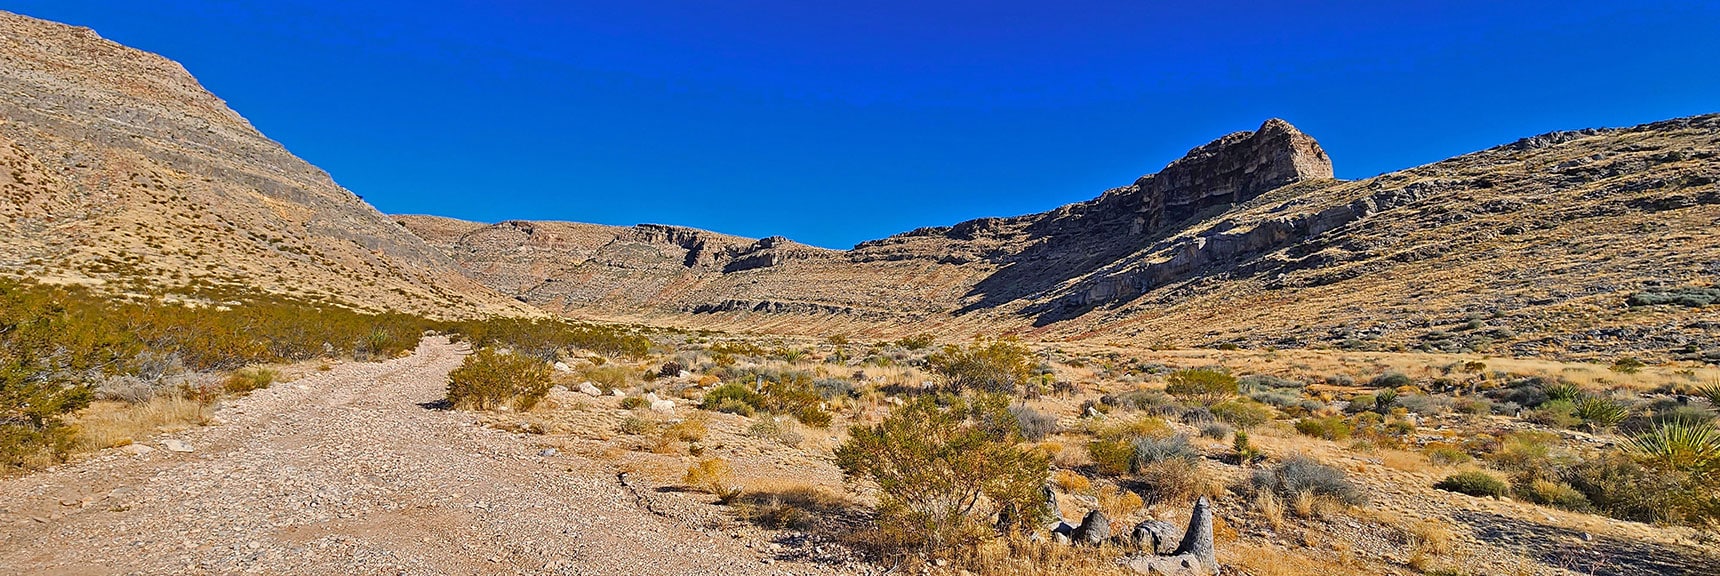 View Up Road into Mule Spring Canyon. | Landmark Bluff Circuit | Lovell Canyon, Nevada